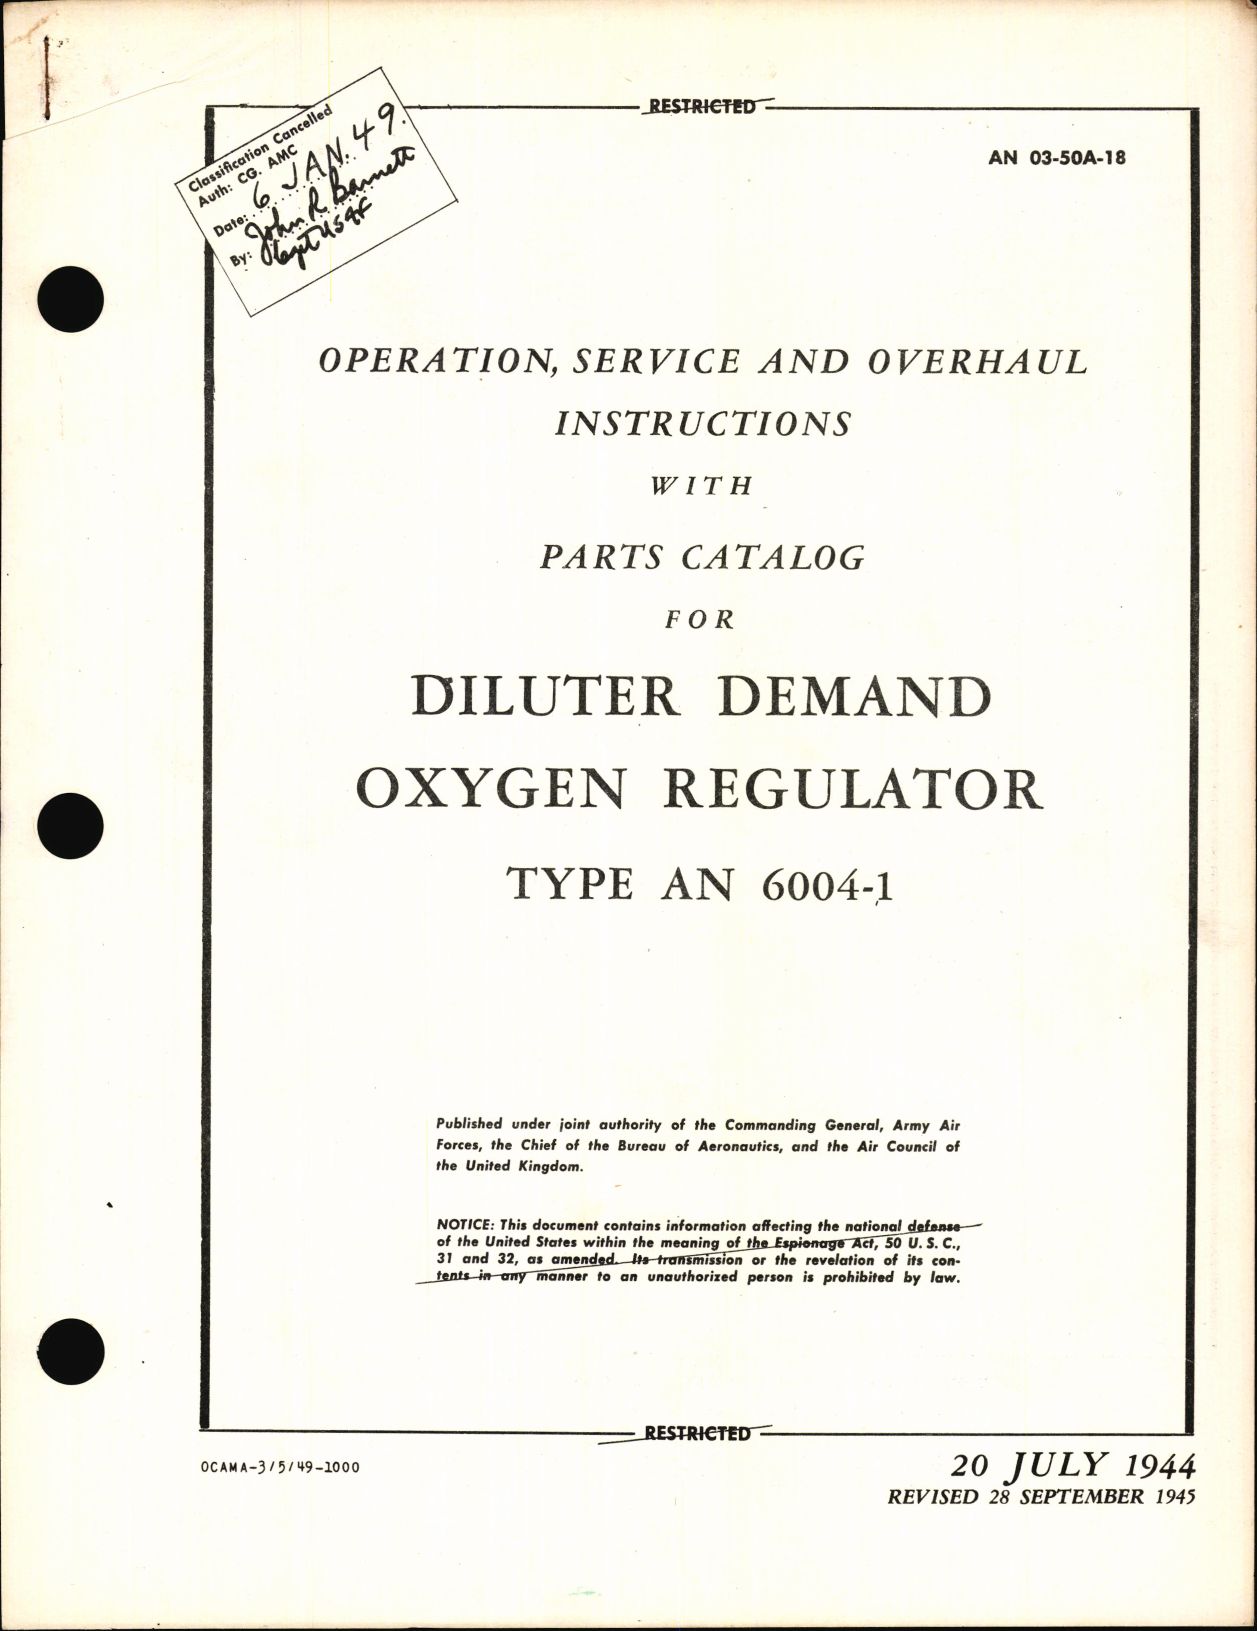 Sample page 1 from AirCorps Library document: Operation, Service and Overhaul Instructions with Parts Catalog for Diluter Demand Oxygen Regulator Type AN 6004-1